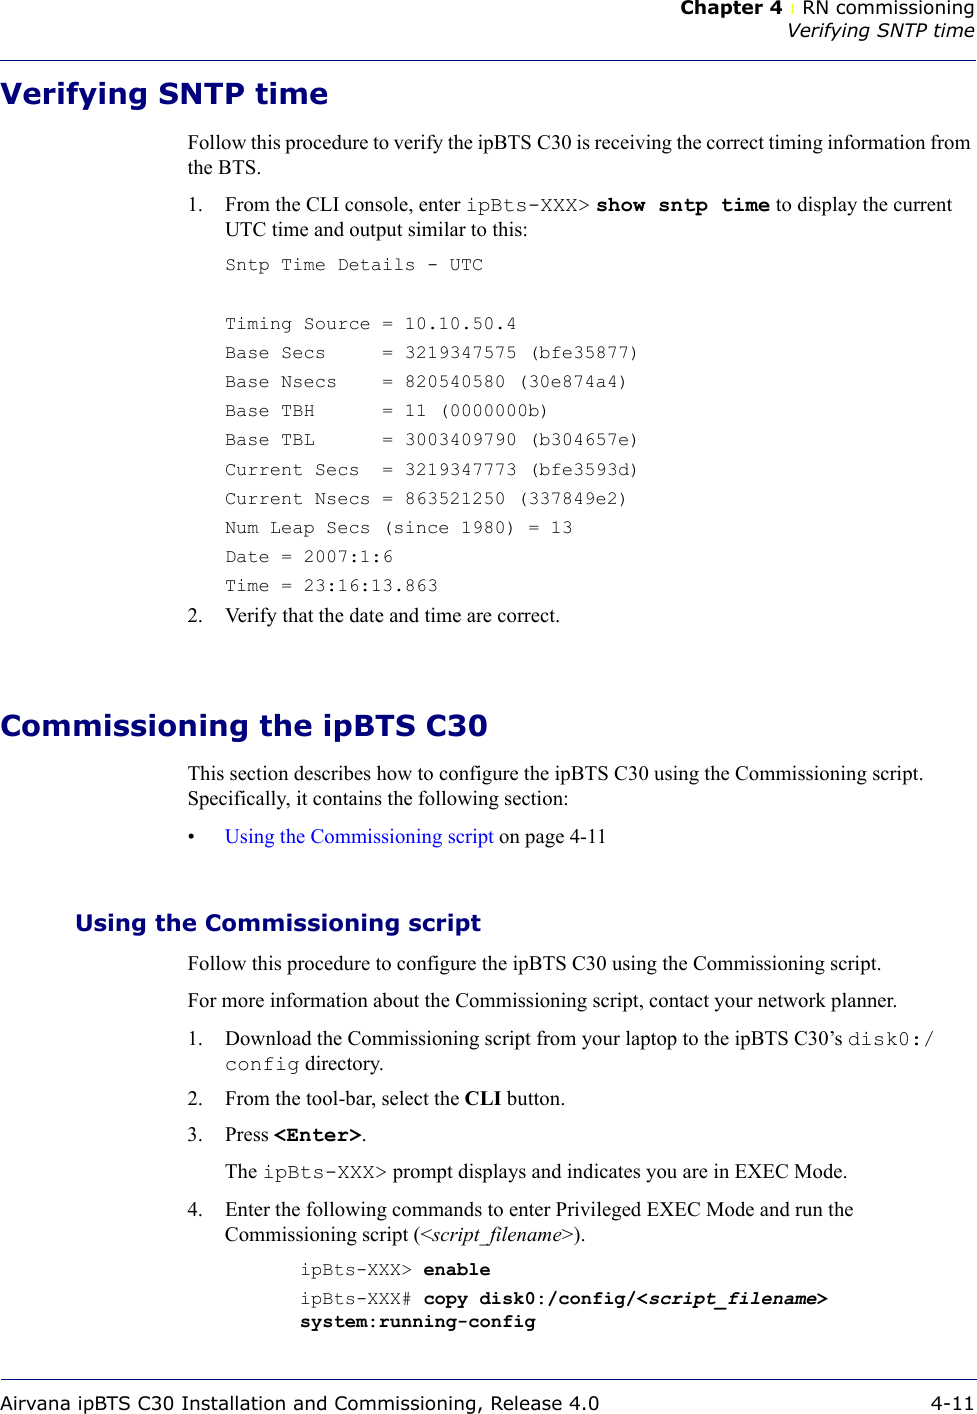 Chapter 4 lRN commissioningVerifying SNTP timeAirvana ipBTS C30 Installation and Commissioning, Release 4.0 4-11Verifying SNTP timeFollow this procedure to verify the ipBTS C30 is receiving the correct timing information from the BTS.1. From the CLI console, enter ipBts-XXX&gt; show sntp time to display the current UTC time and output similar to this:Sntp Time Details - UTCTiming Source = 10.10.50.4Base Secs     = 3219347575 (bfe35877)Base Nsecs    = 820540580 (30e874a4)Base TBH      = 11 (0000000b)Base TBL      = 3003409790 (b304657e)Current Secs  = 3219347773 (bfe3593d)Current Nsecs = 863521250 (337849e2)Num Leap Secs (since 1980) = 13Date = 2007:1:6Time = 23:16:13.8632. Verify that the date and time are correct.Commissioning the ipBTS C30This section describes how to configure the ipBTS C30 using the Commissioning script. Specifically, it contains the following section:•Using the Commissioning script on page 4-11Using the Commissioning scriptFollow this procedure to configure the ipBTS C30 using the Commissioning script.For more information about the Commissioning script, contact your network planner.1. Download the Commissioning script from your laptop to the ipBTS C30’s disk0:/config directory.2. From the tool-bar, select the CLI button.3. Press &lt;Enter&gt;.The ipBts-XXX&gt; prompt displays and indicates you are in EXEC Mode.4. Enter the following commands to enter Privileged EXEC Mode and run the Commissioning script (&lt;script_filename&gt;).ipBts-XXX&gt; enable ipBts-XXX# copy disk0:/config/&lt;script_filename&gt; system:running-config